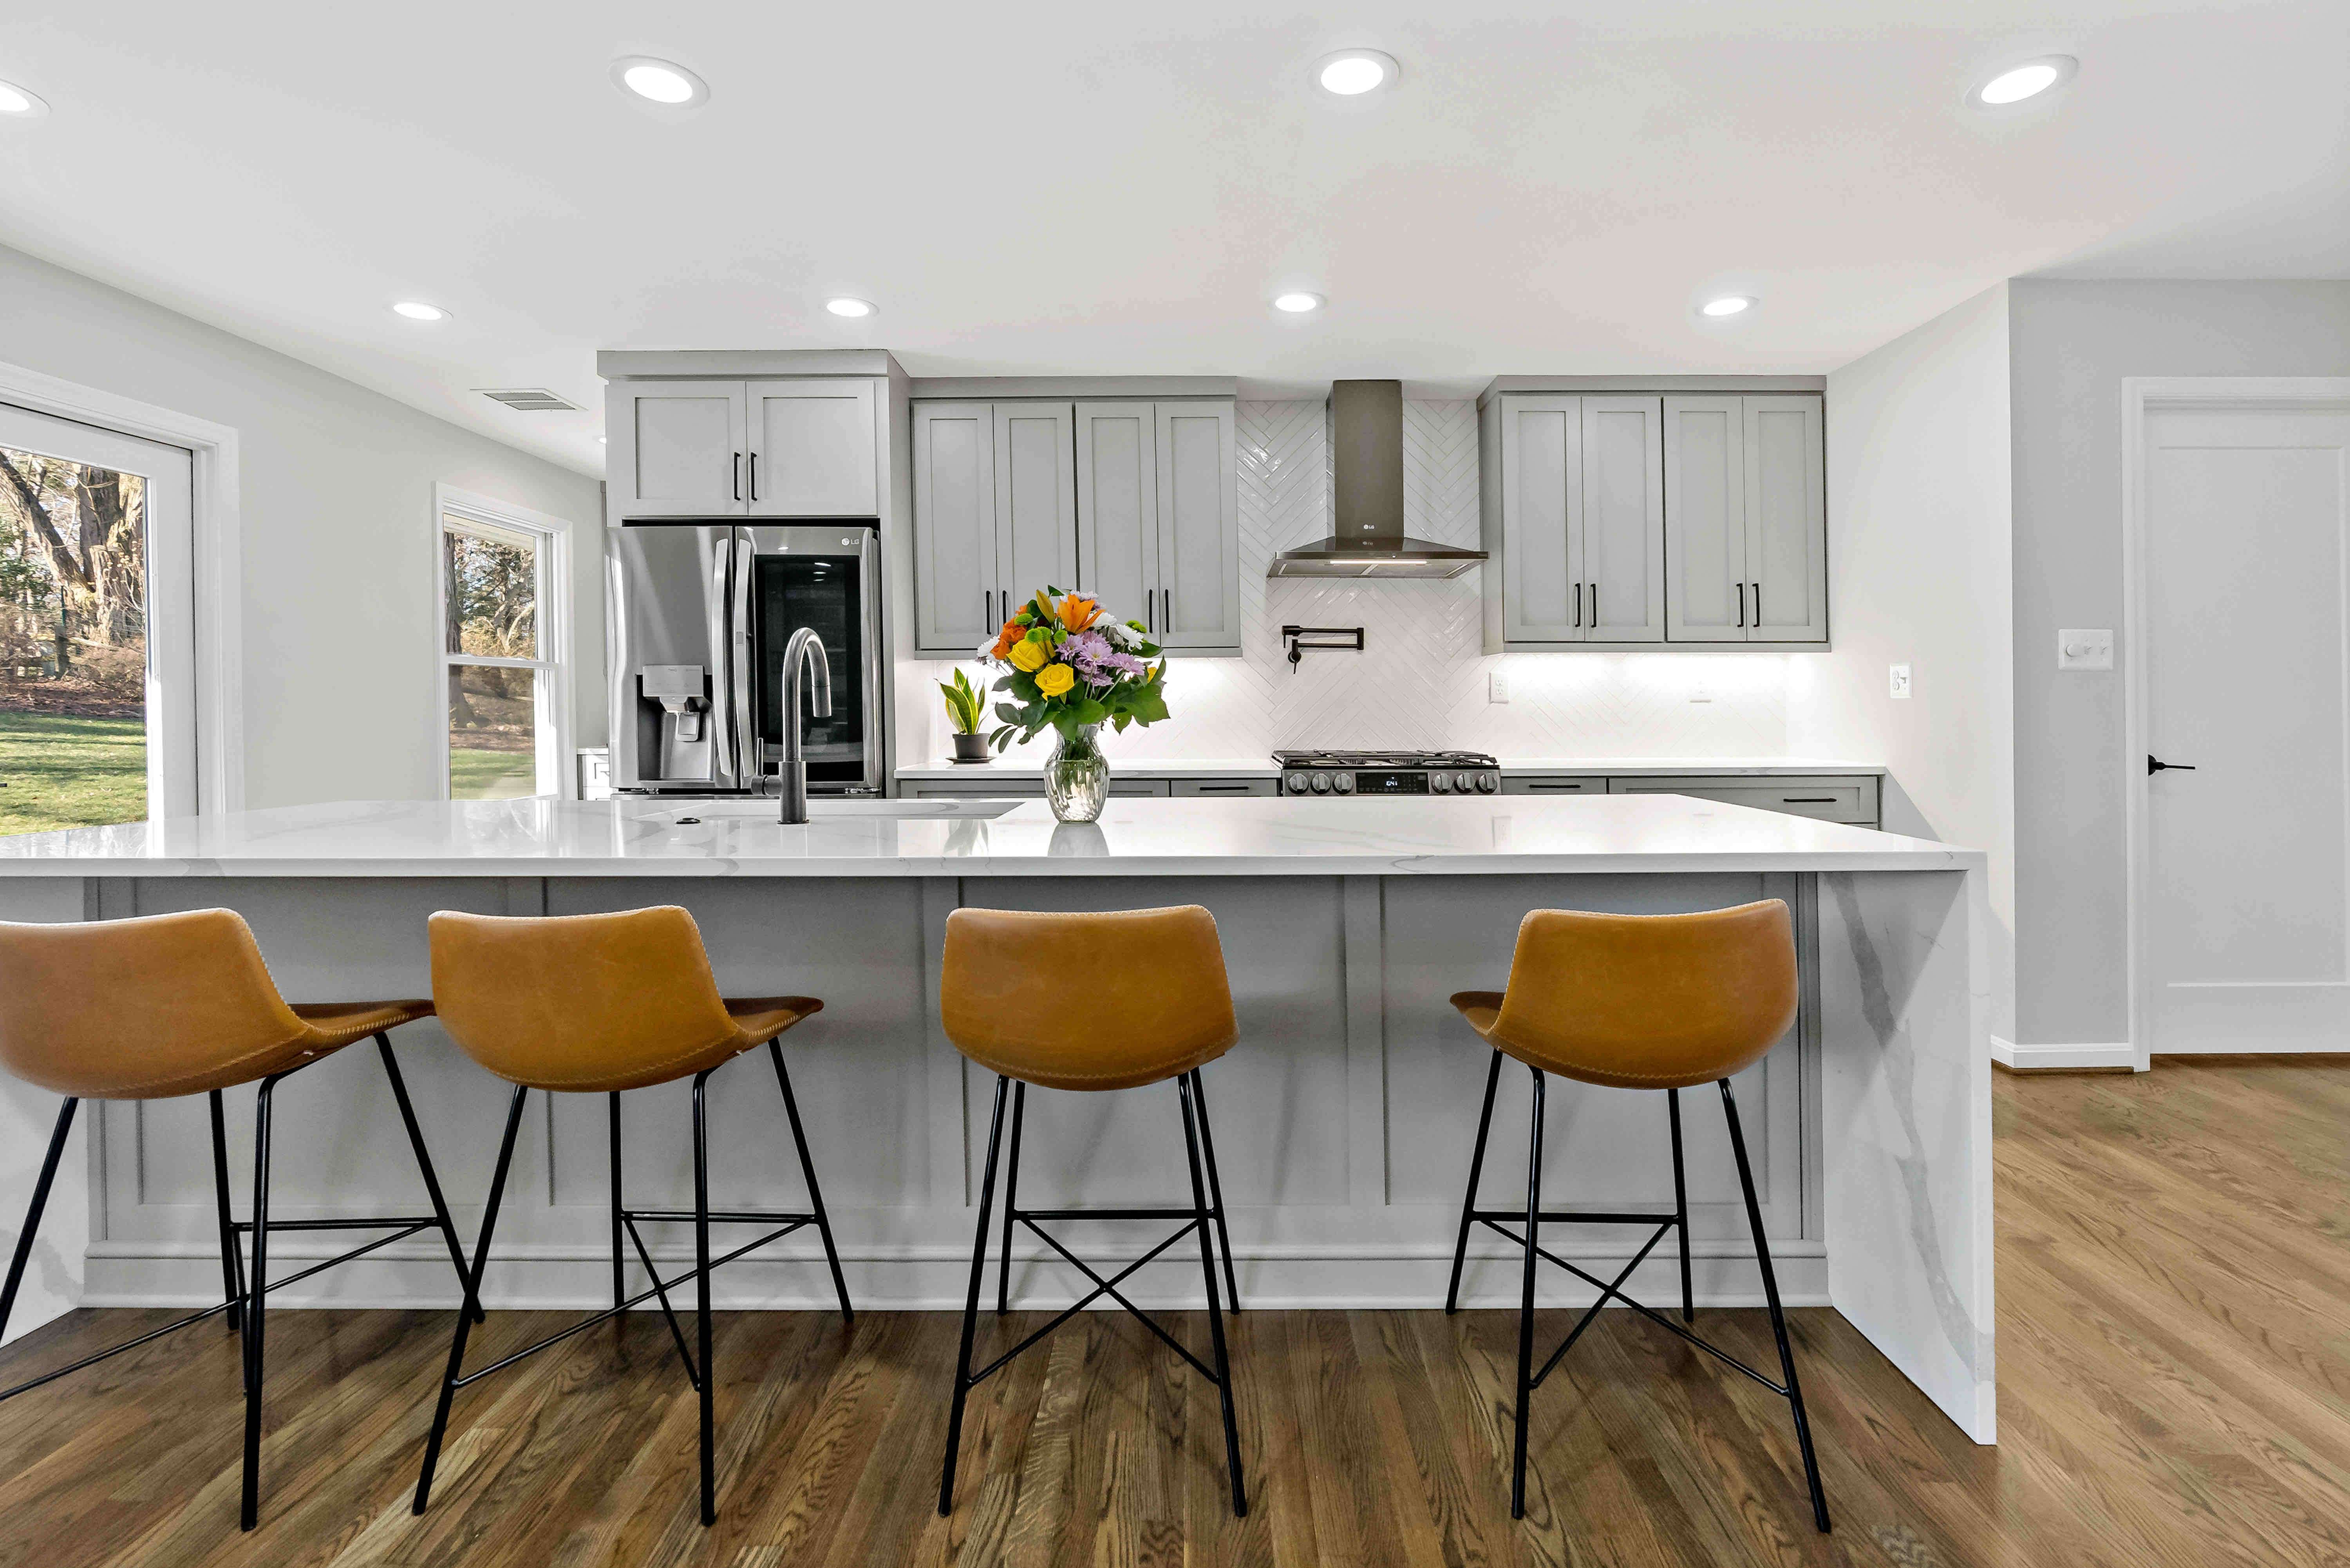 Long white kitchen island with brown chairs for seating